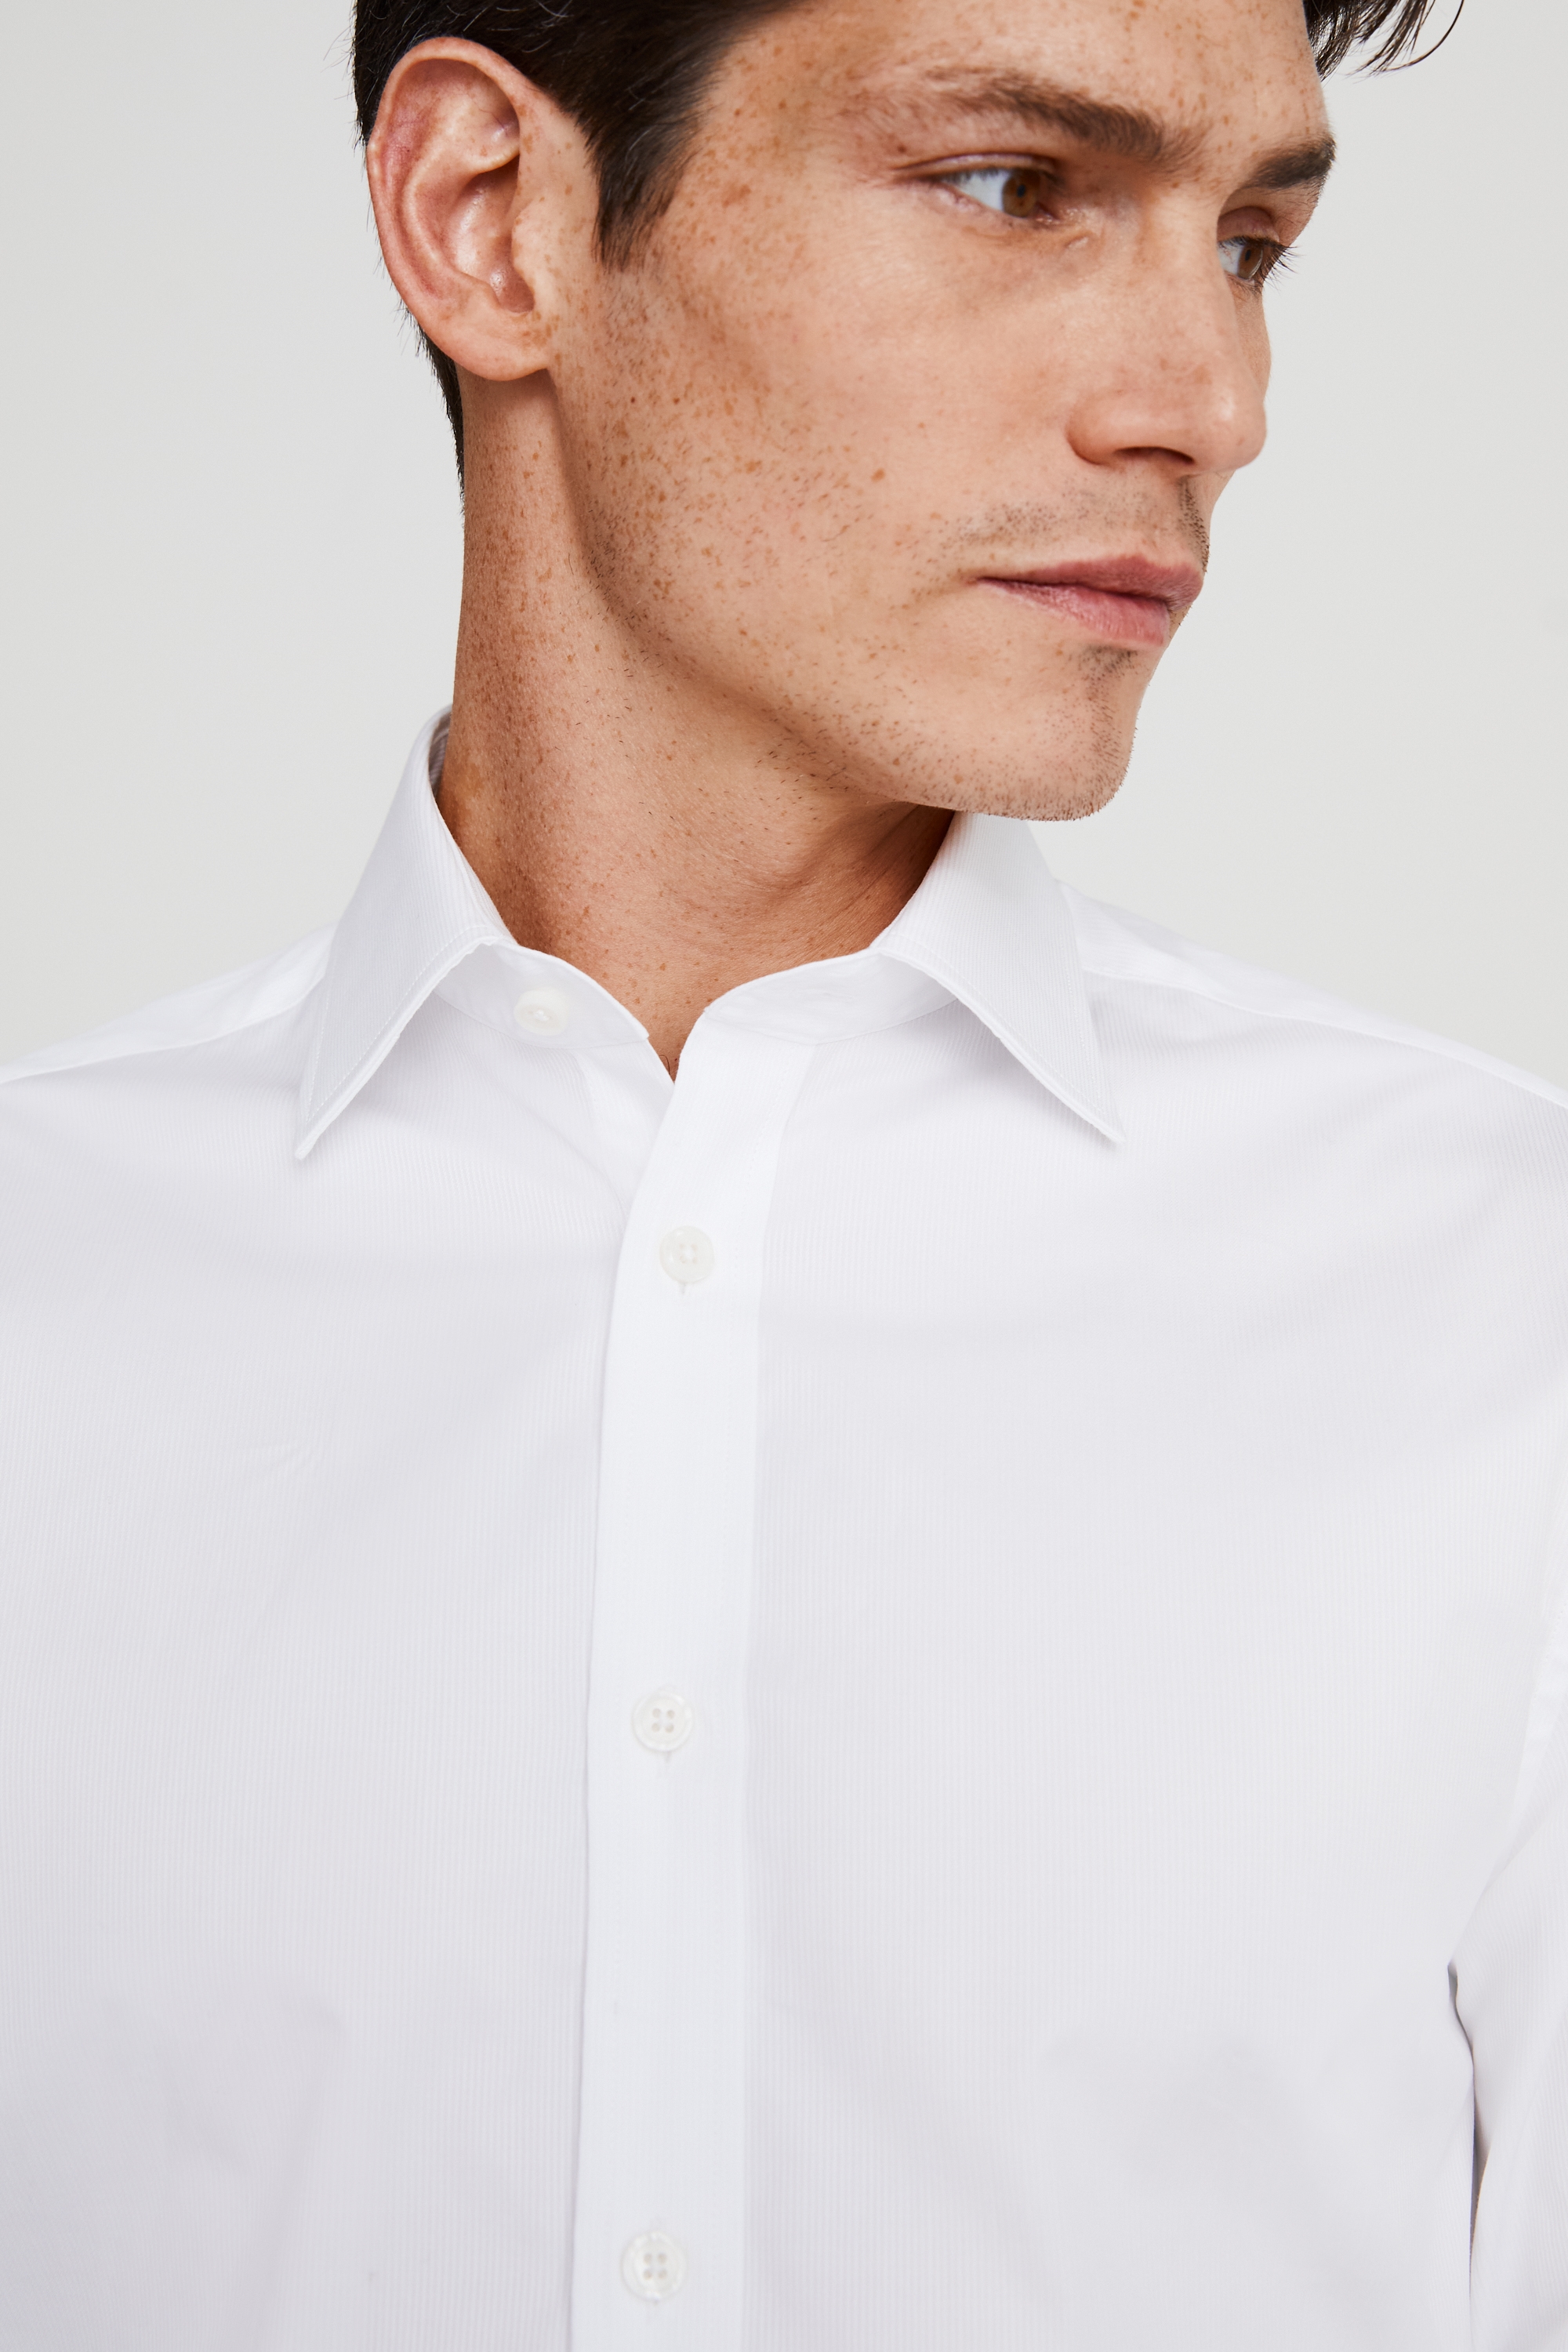 Tailored Fit White Stripe Shirt | Buy Online at Moss